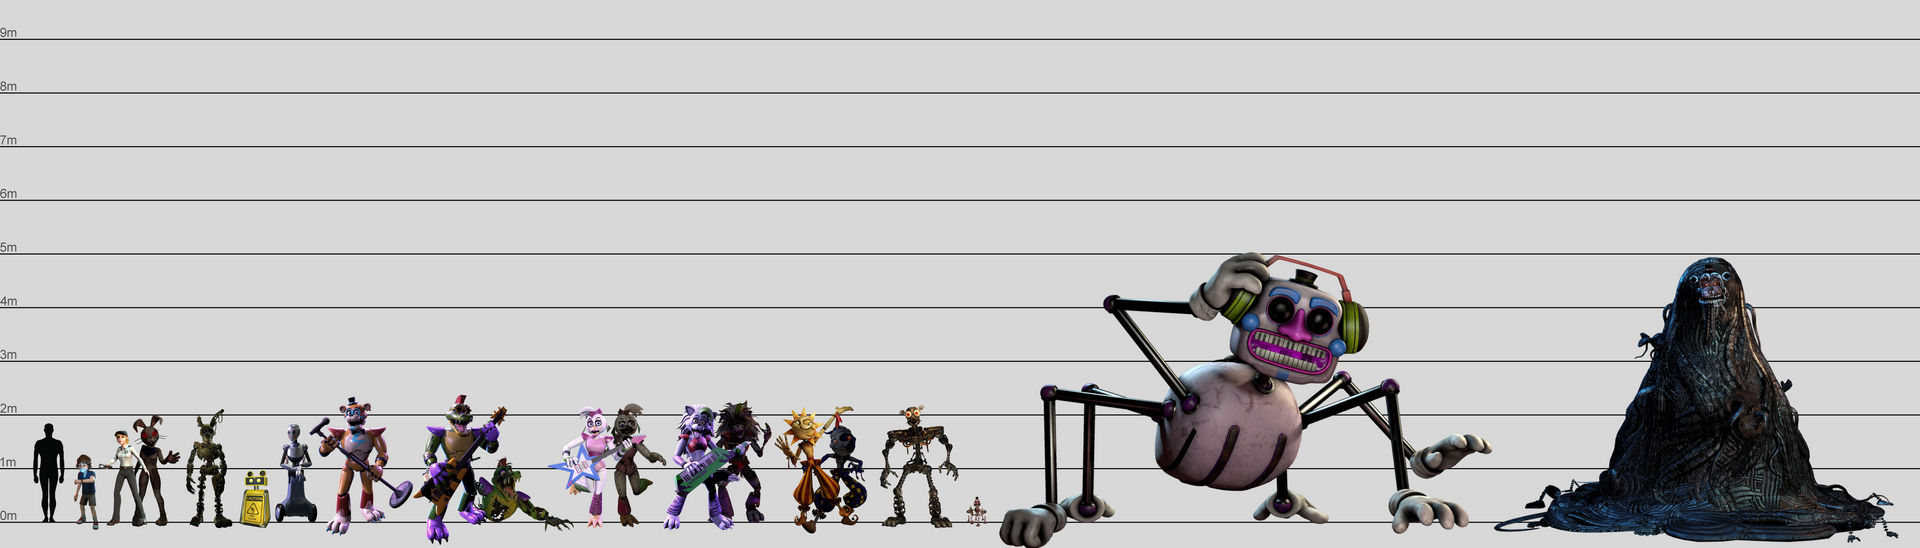 FNAF Security Breach Animatronics Guide - Names, Heights